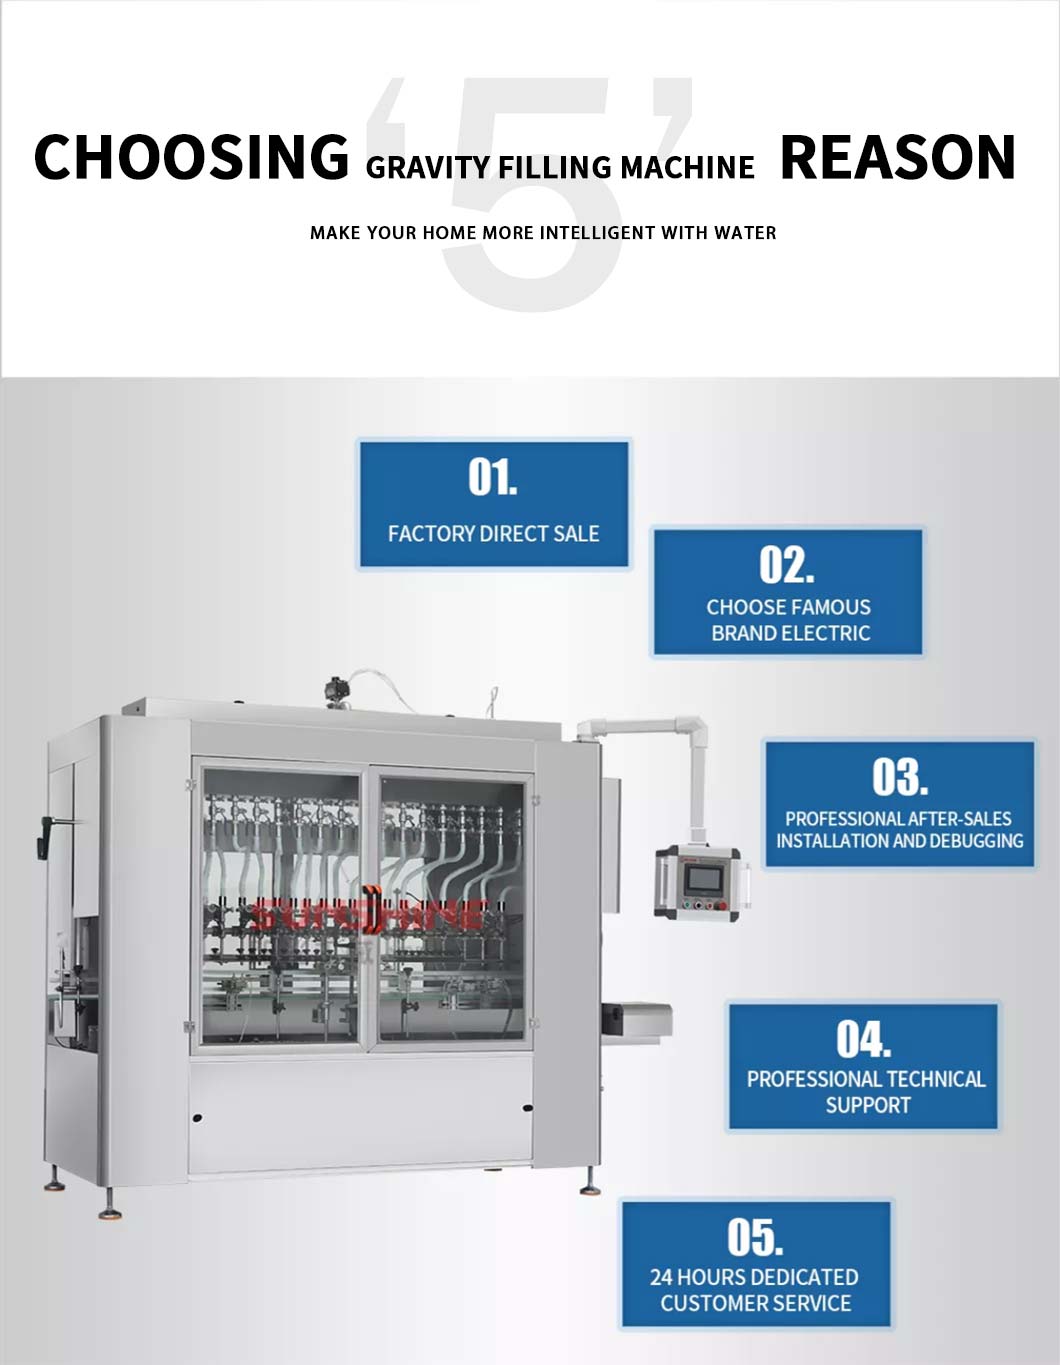 The reasons for choosing the Automatic Gravity Liquid Filling Machine